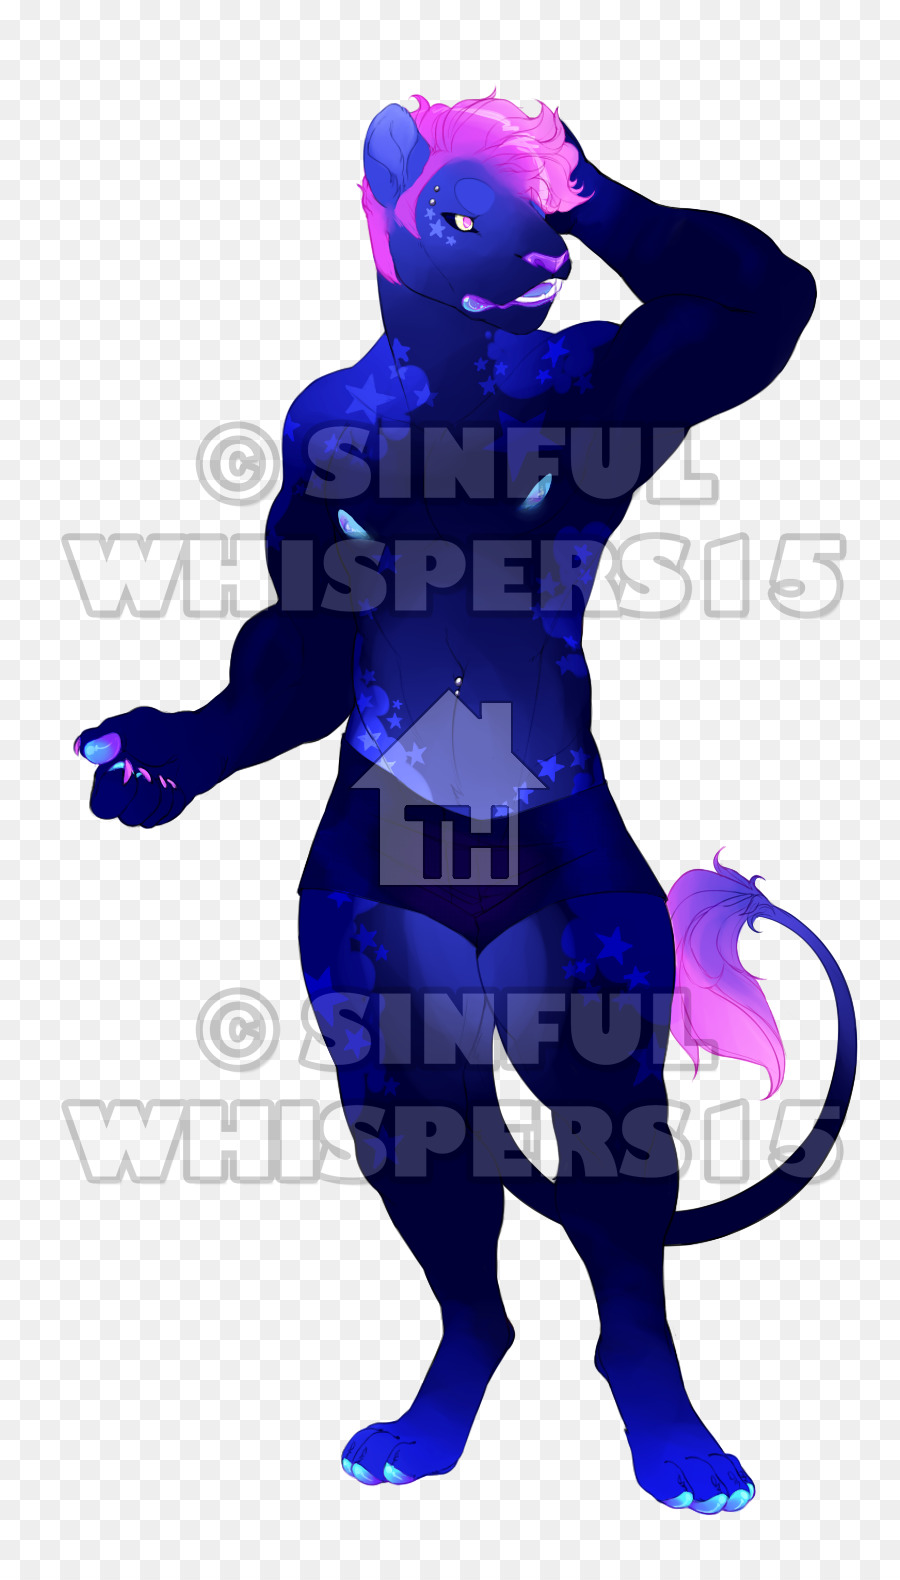 Silhouette Character Clip art - Silhouette png download - 829*1574 - Free Transparent Silhouette png Download.